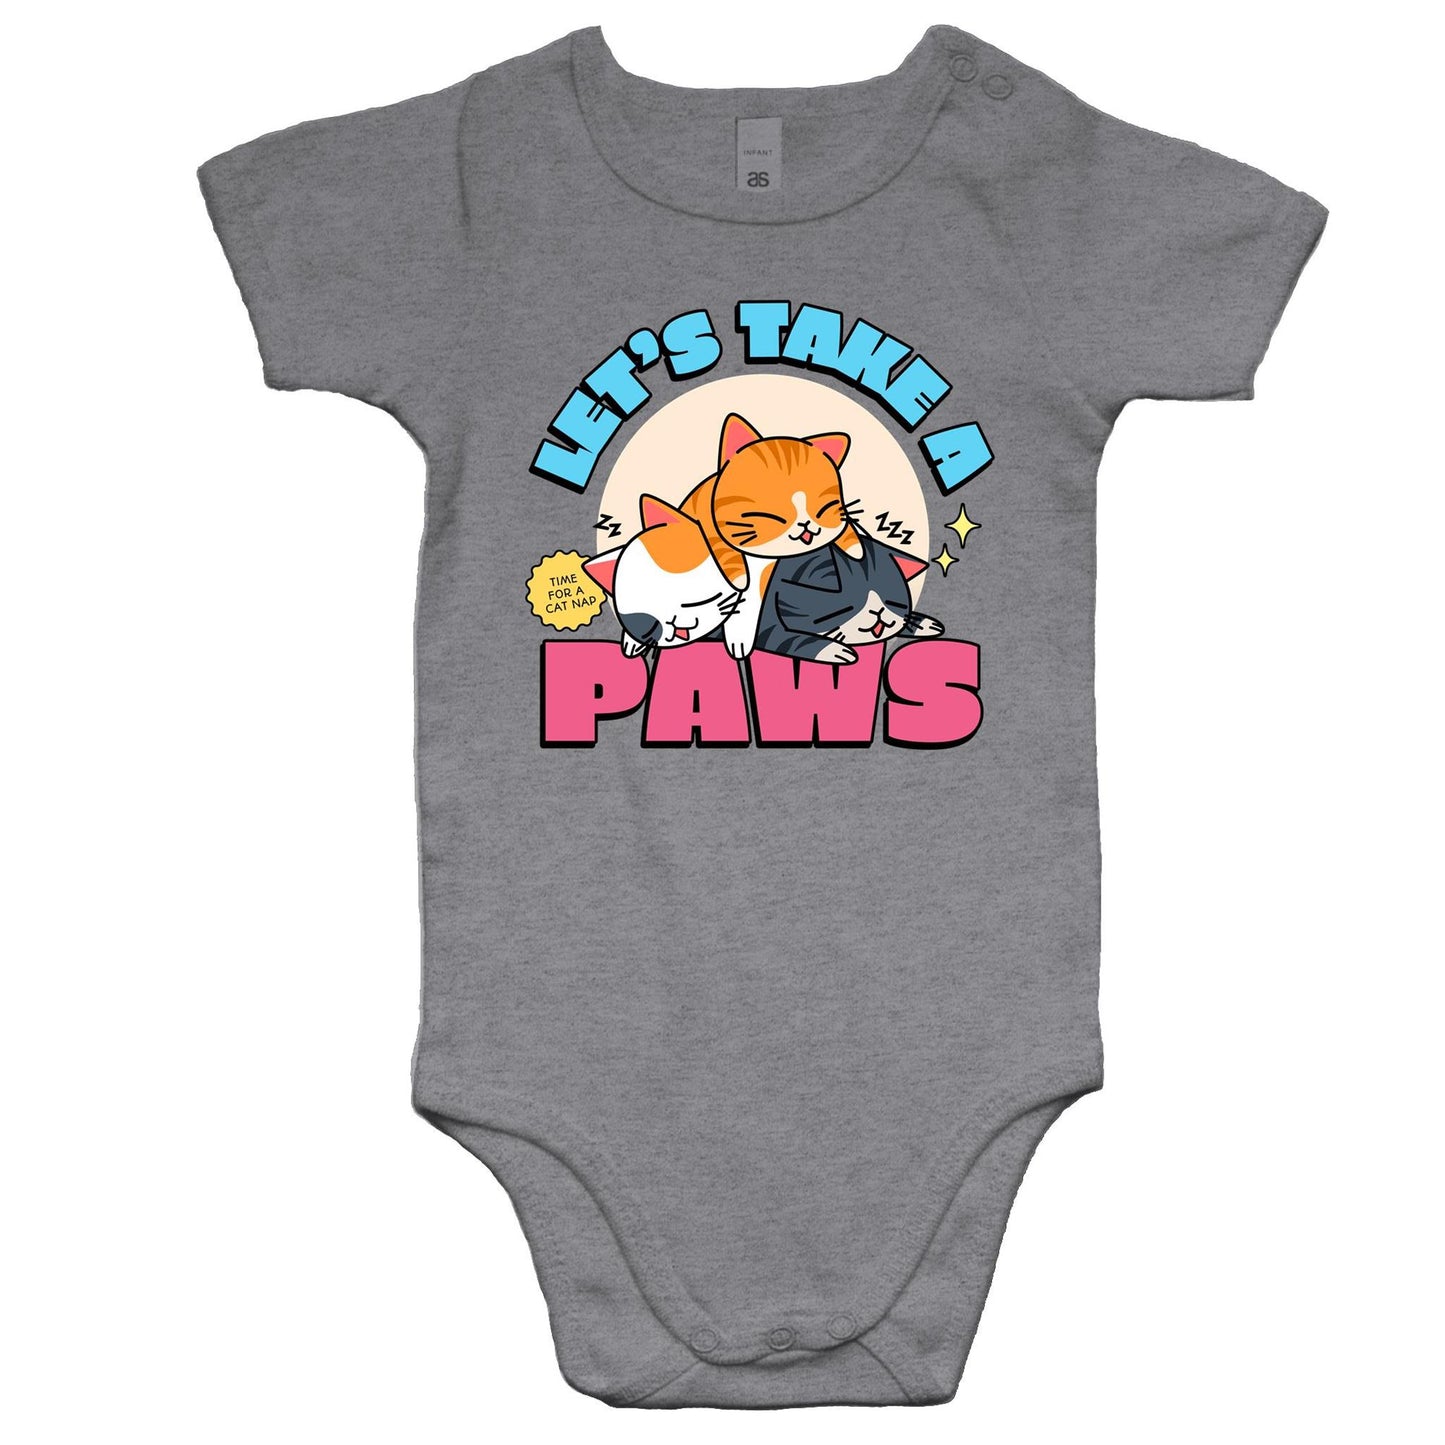 Let's Take A Paws, Time For A Cat Nap - Baby Bodysuit Grey Marle Baby Bodysuit animal